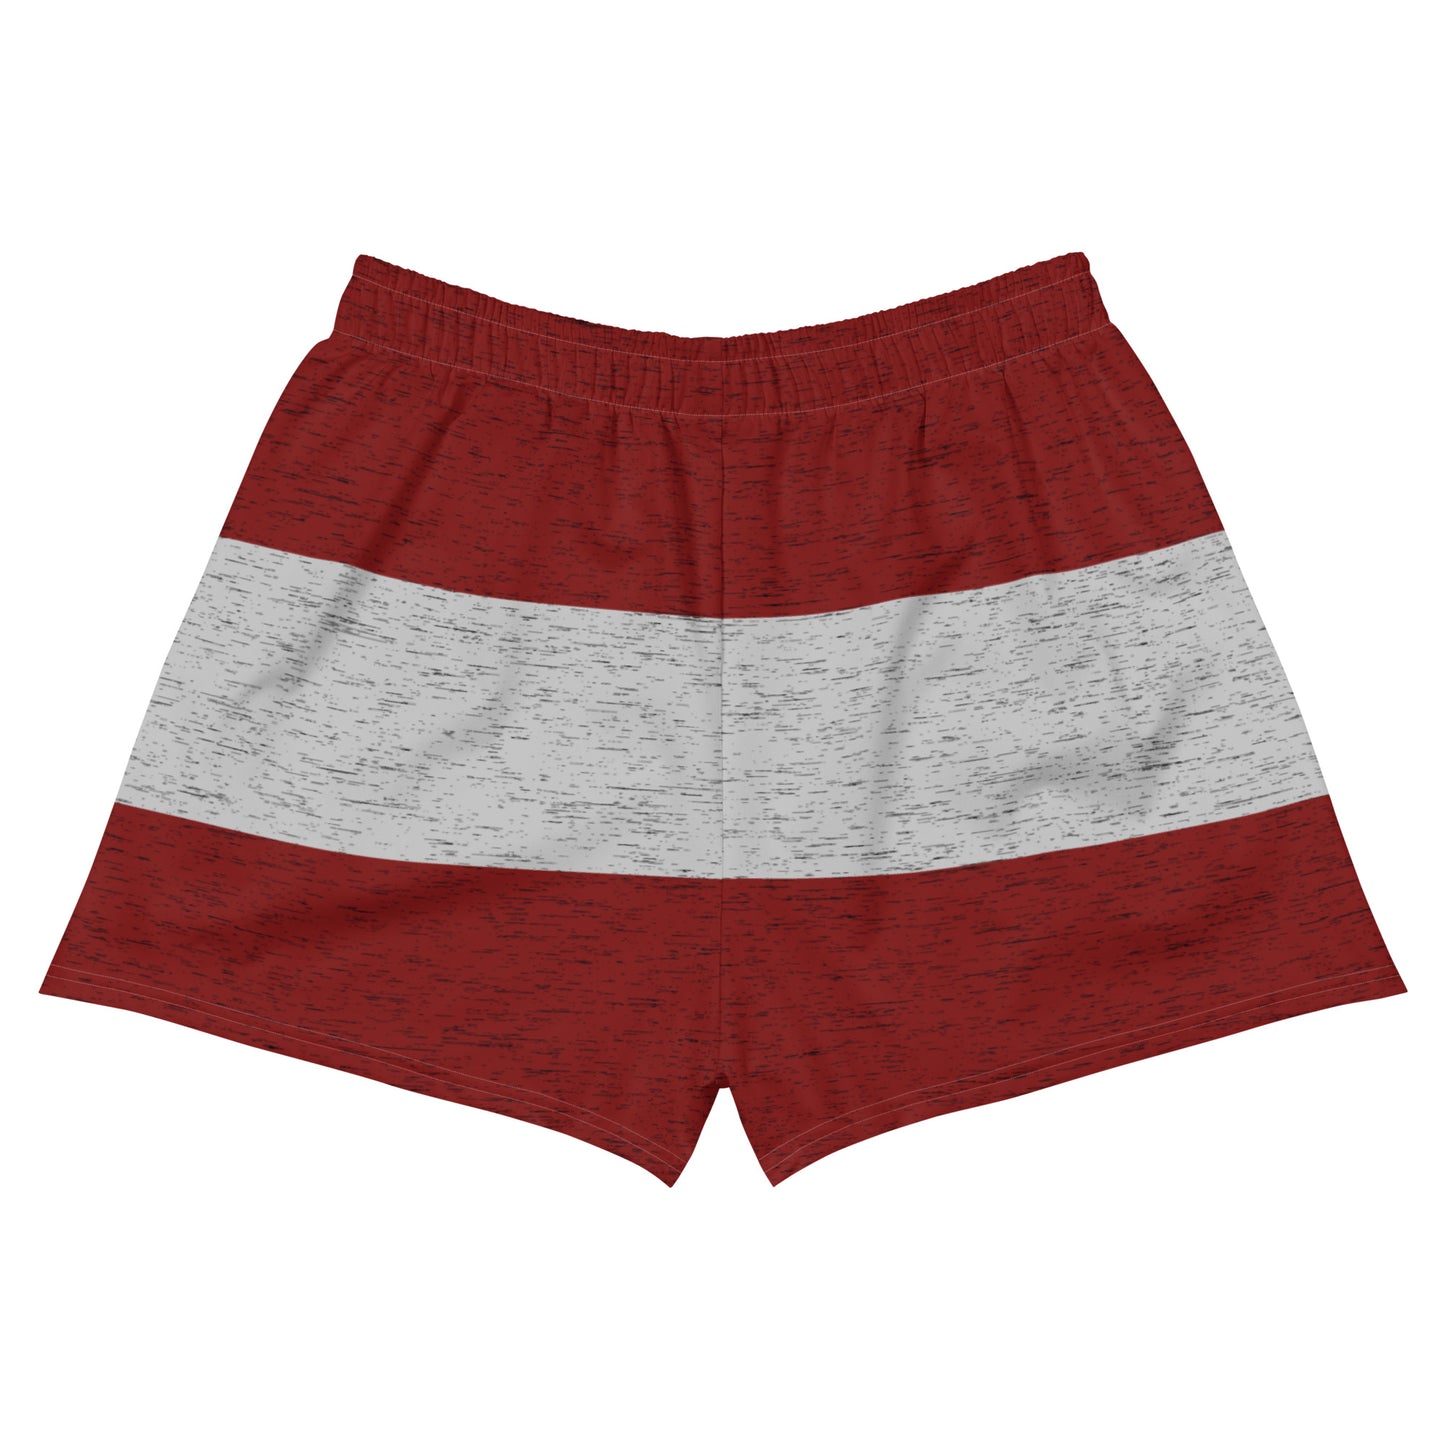 Mezzotint - Inspired By Taylor Swift - Sustainably Made Women’s Shorts